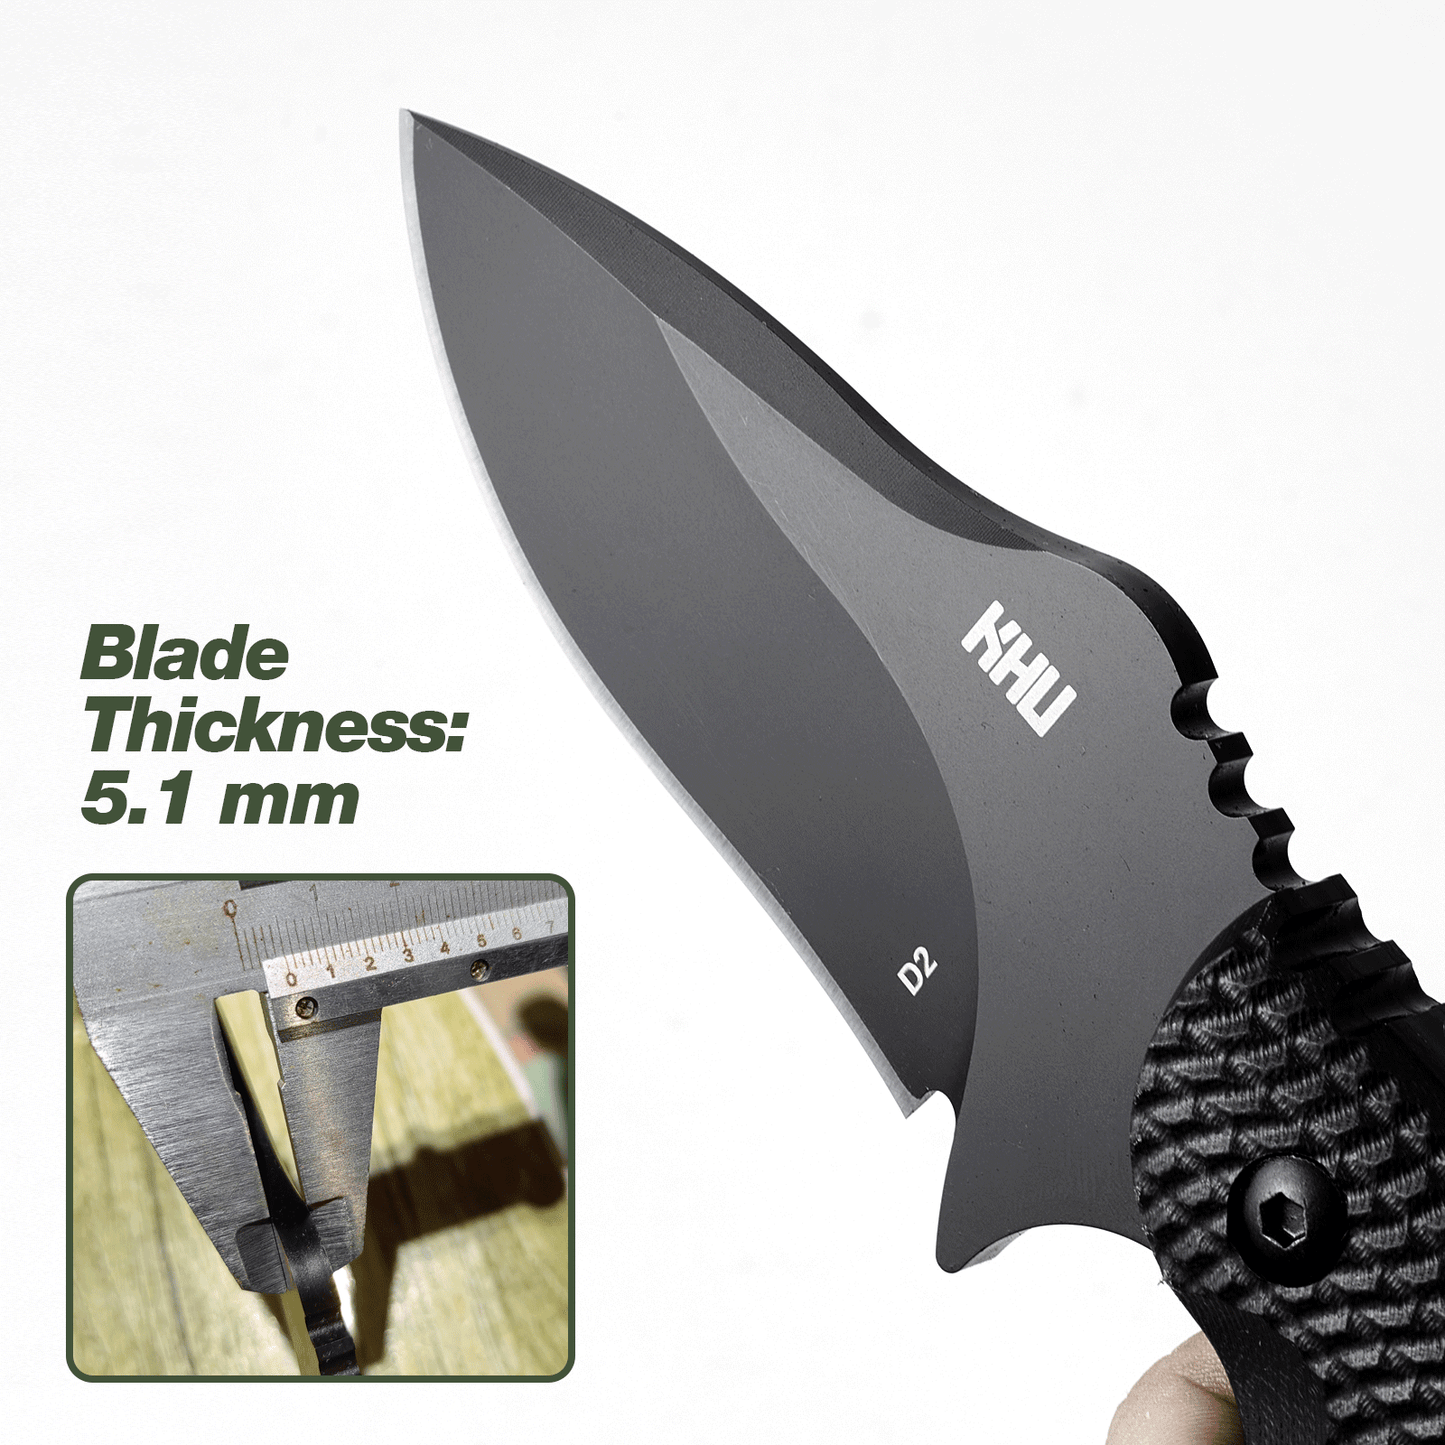 KHU Fixed Blade Knife Tactical, Hunting Knife Survival Knife Camping Knife D2 Steel G10 Handle, Outdoor Hunting Camping Accessories Camping Gear With Kydex Sheath